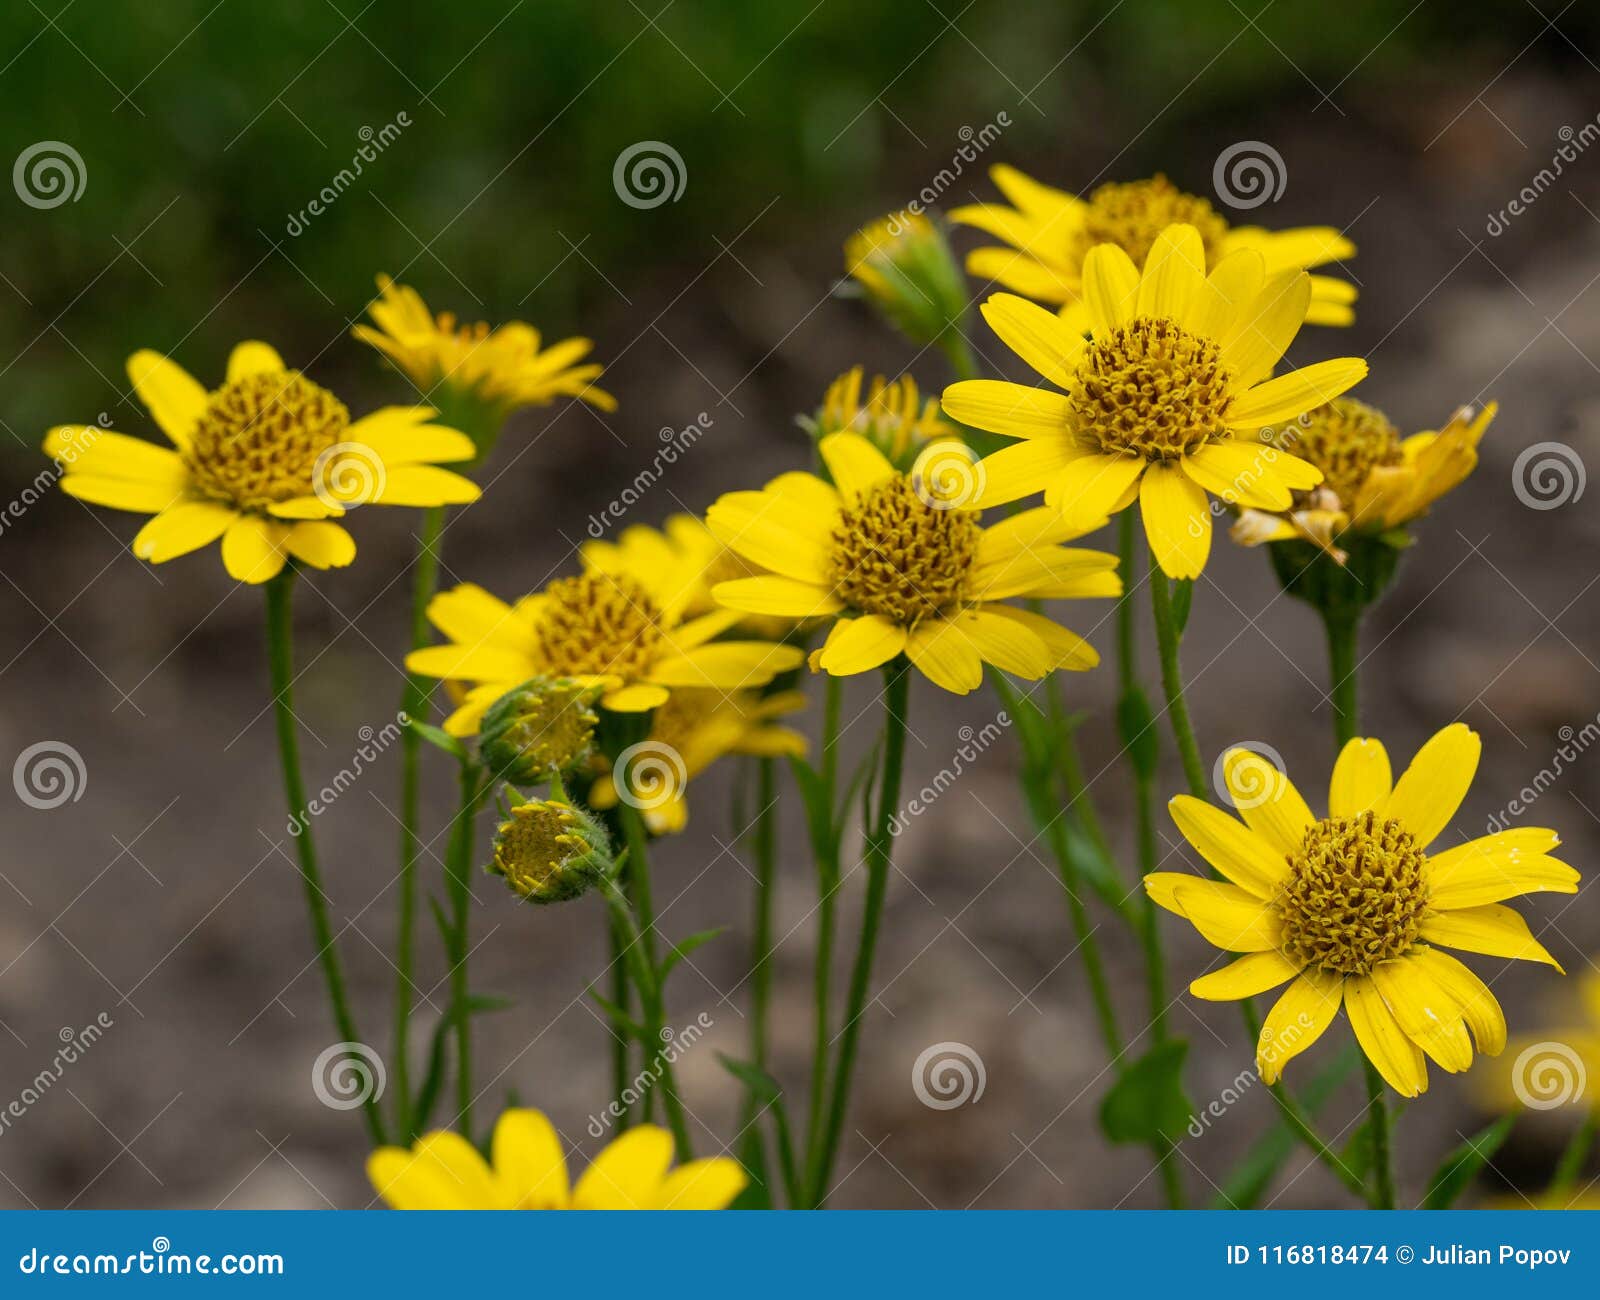 close view of yellow arnicaarnica montana herb blossoms** note